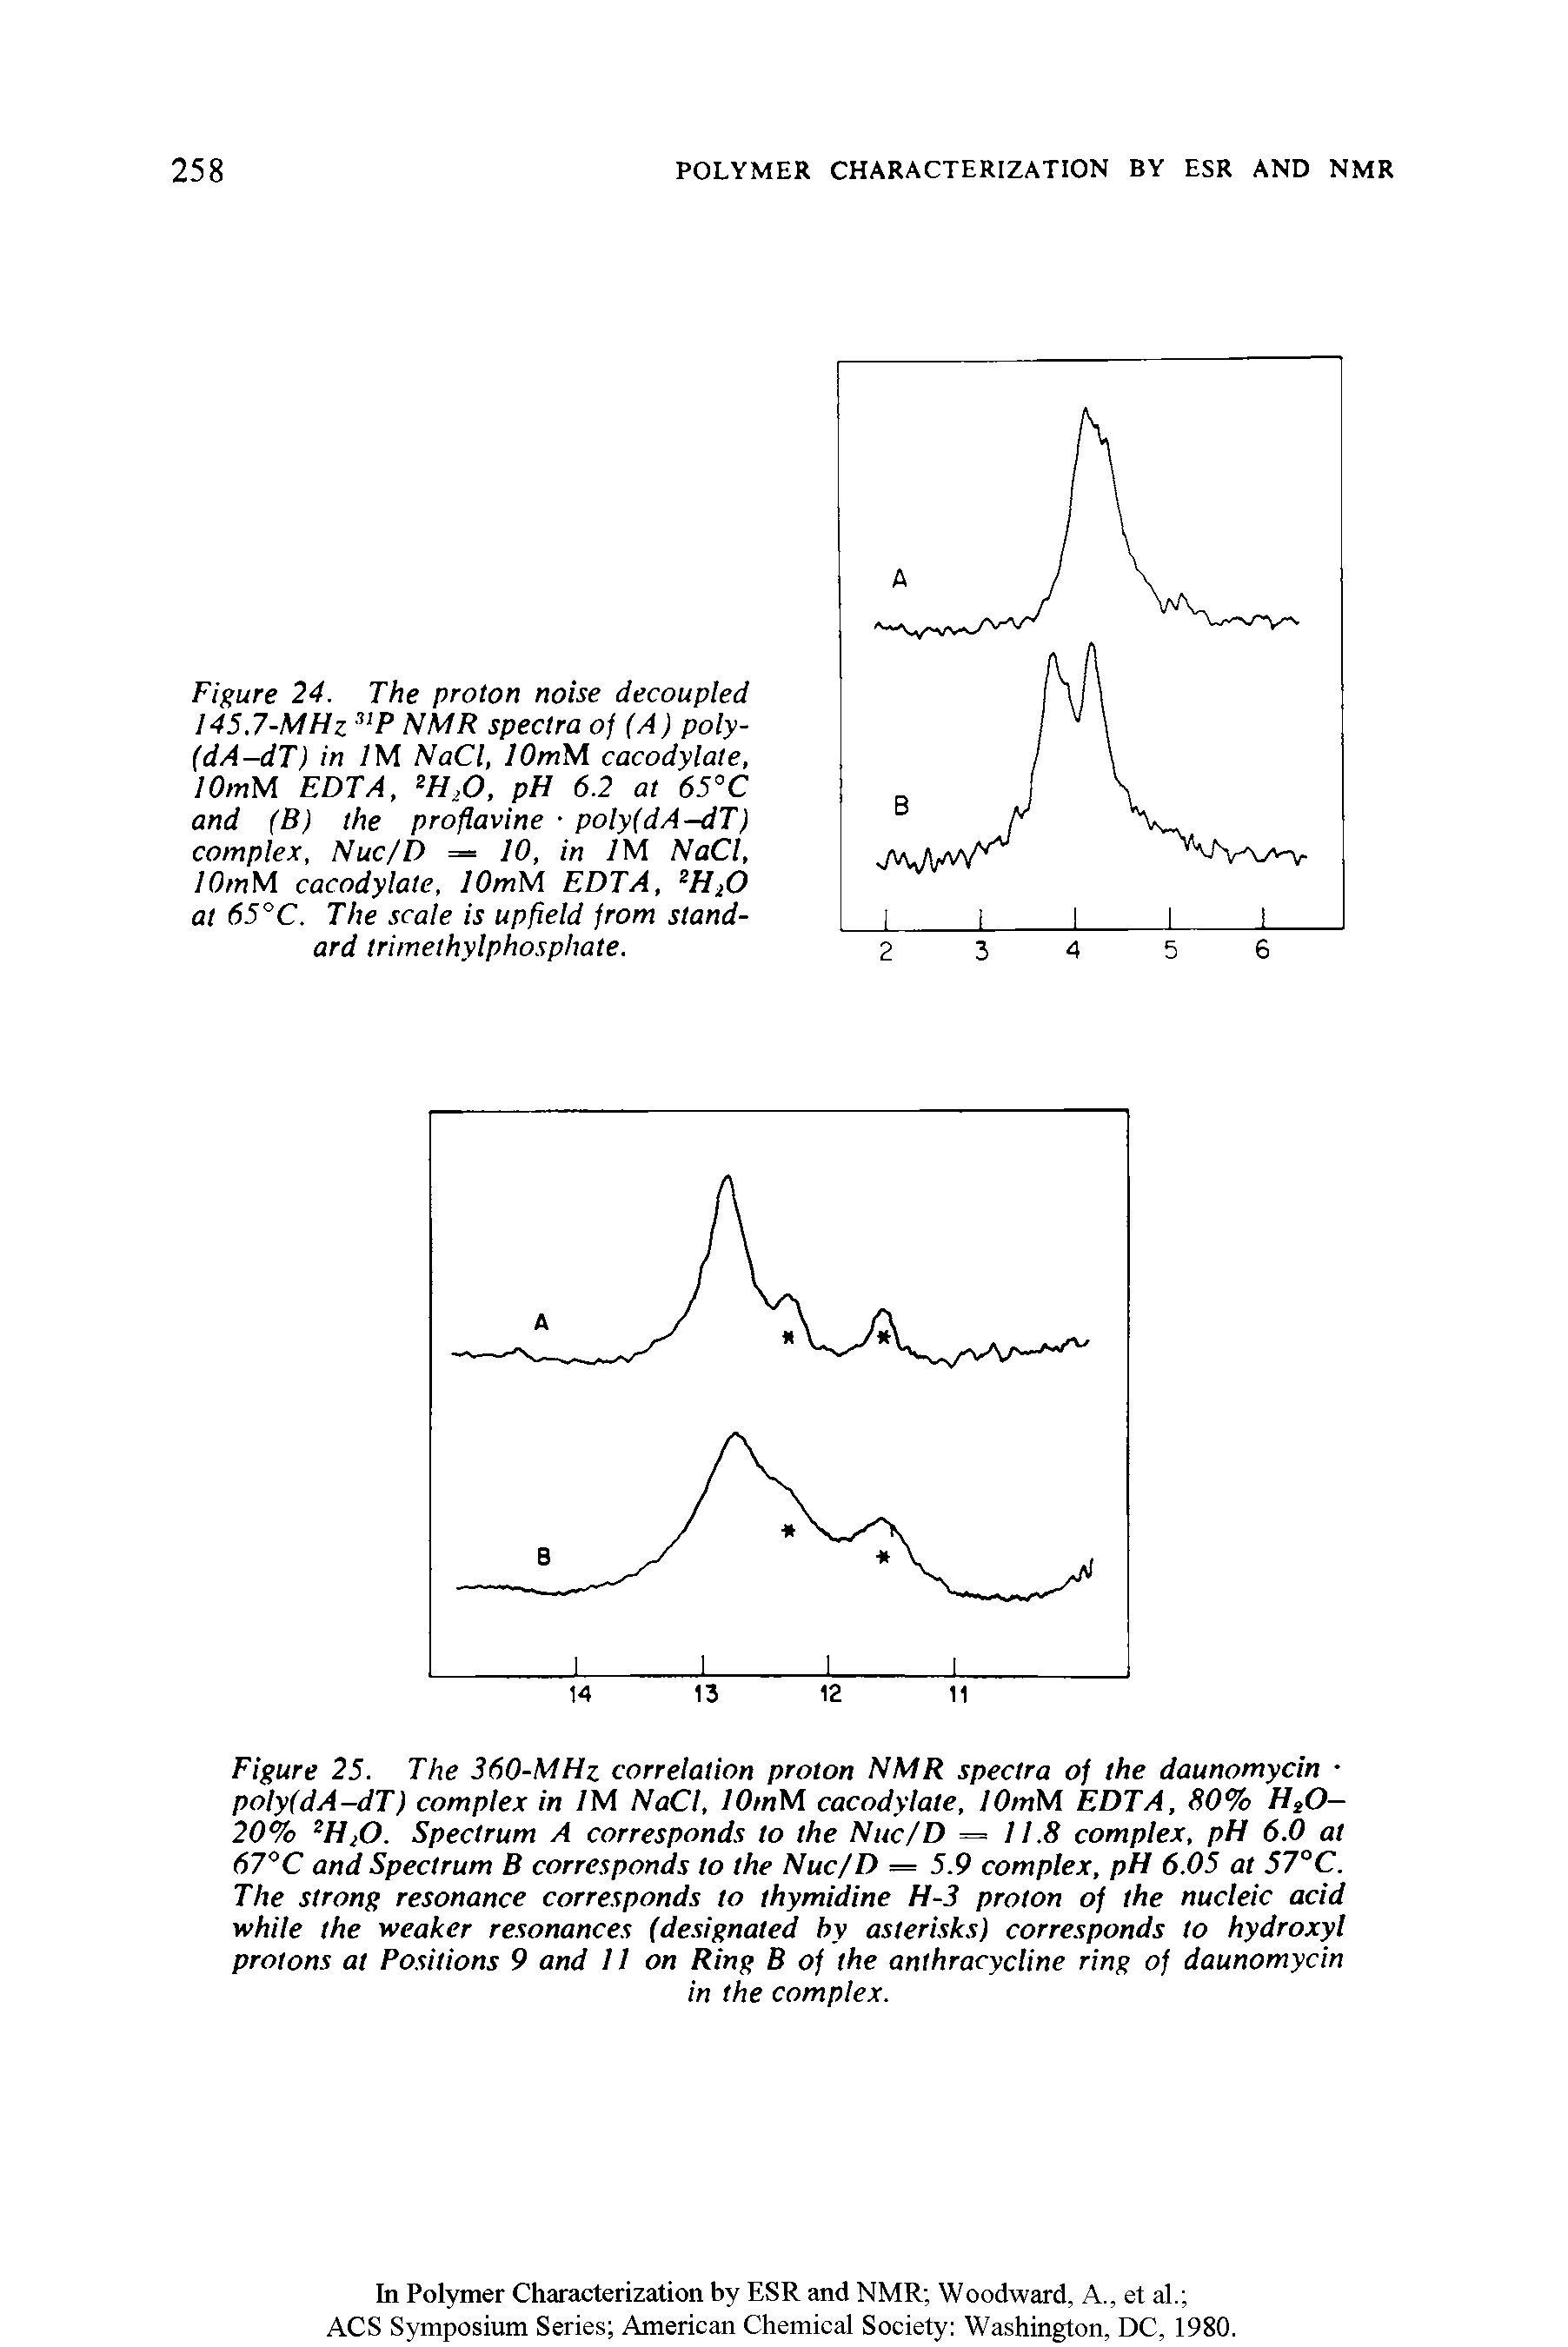 Figure 25. The 360-MHz correlation proton NMR spectra of the daunomycin poly(dA-dT) complex in /M NaCl, lOmNi cacodylate, lOmM EDTA, 80% HaO— 20% 2H 20. Spectrum A corresponds to the Nuc/D = 11.8 complex, pH 6.0 at 67°C and Spectrum B corresponds to the Nuc/D = 5.9 complex, pH 6.05 at 57°C. The strong resonance corresponds to thymidine H-3 proton of the nucleic acid while the weaker resonances (designated hy asterisks) corresponds to hydroxyl protons at Positions 9 and 11 on Ring B of the anthracycline ring of daunomycin...